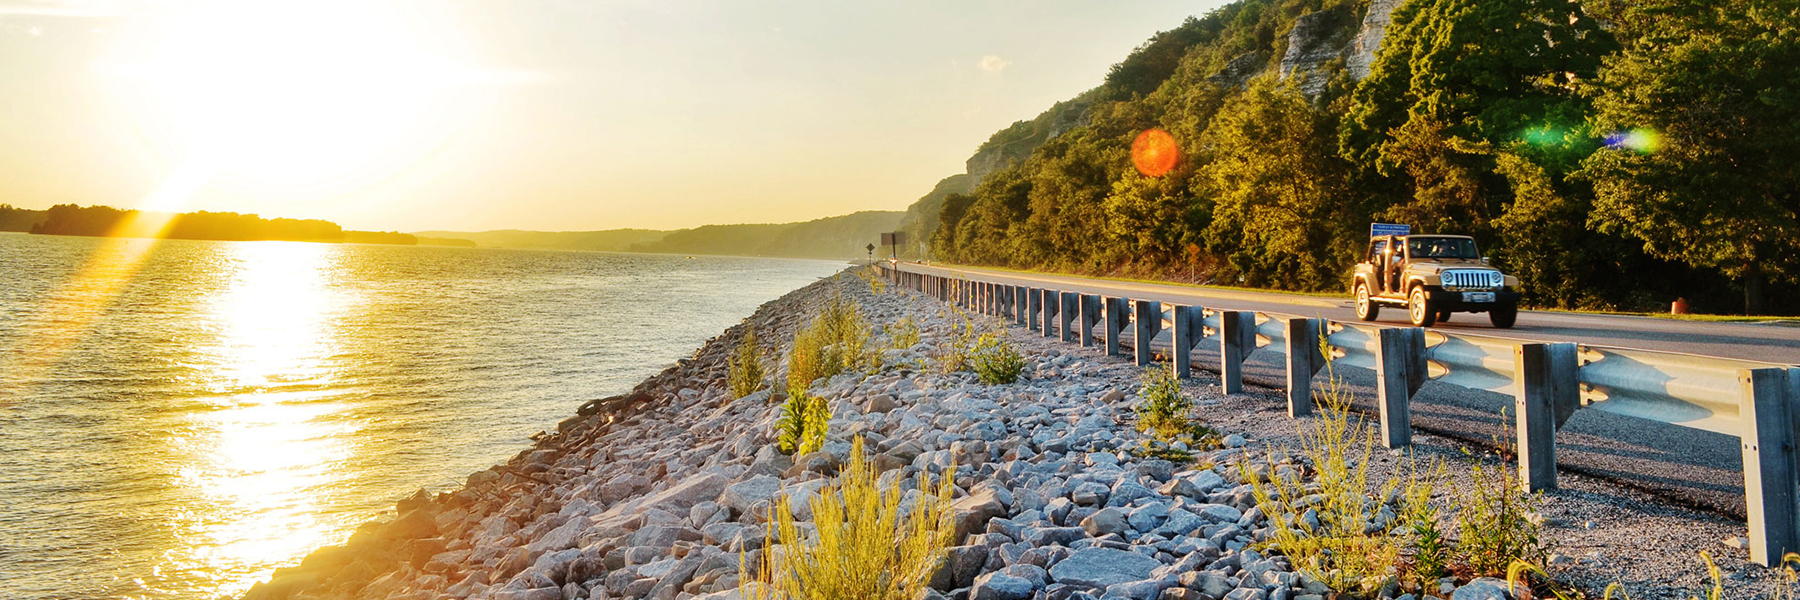 The Great River Road runs along the shore of the Mississippi River.